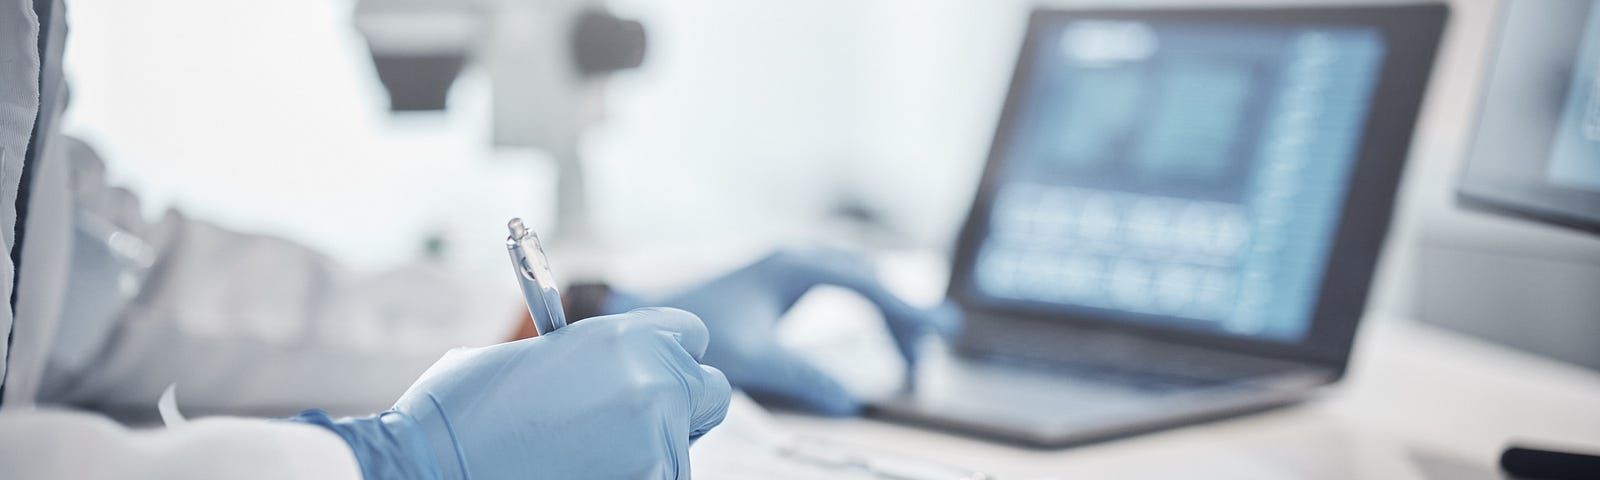 Image of a person in a white lab coat and blue gloves taking notes at a laptop